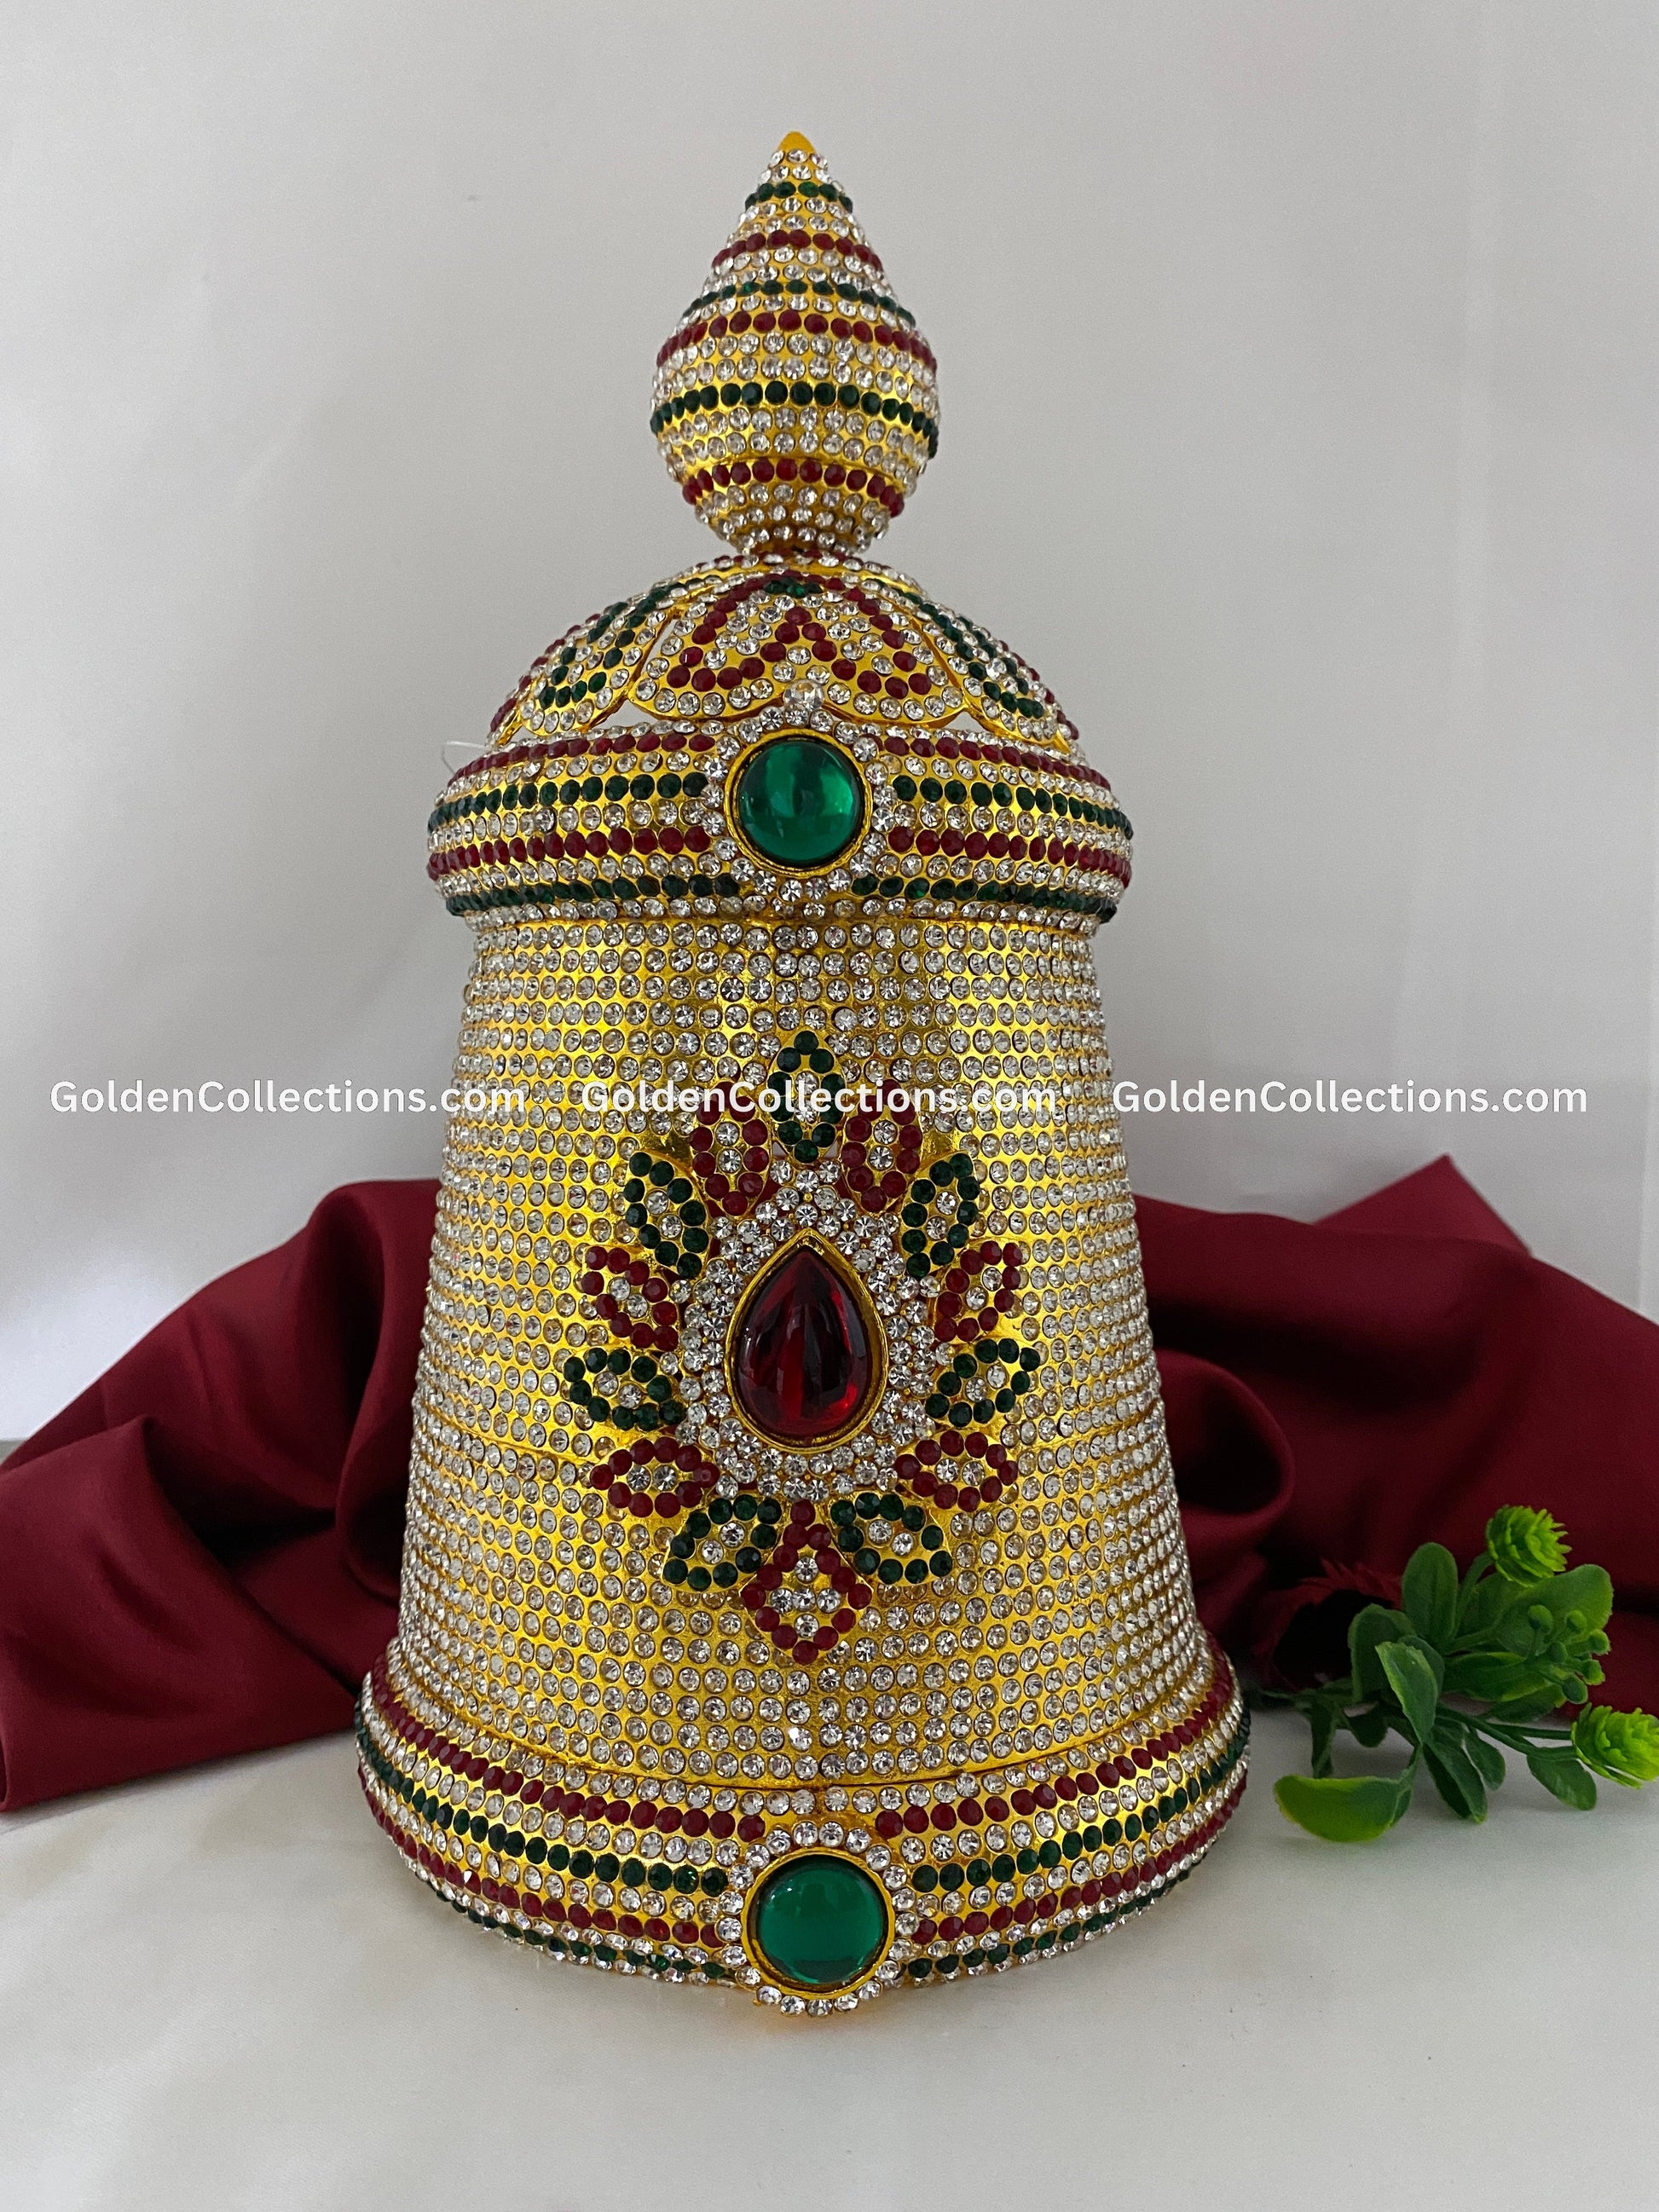 Hindu Deity Crown with Intricate Design - GoldenCollections DGC-035